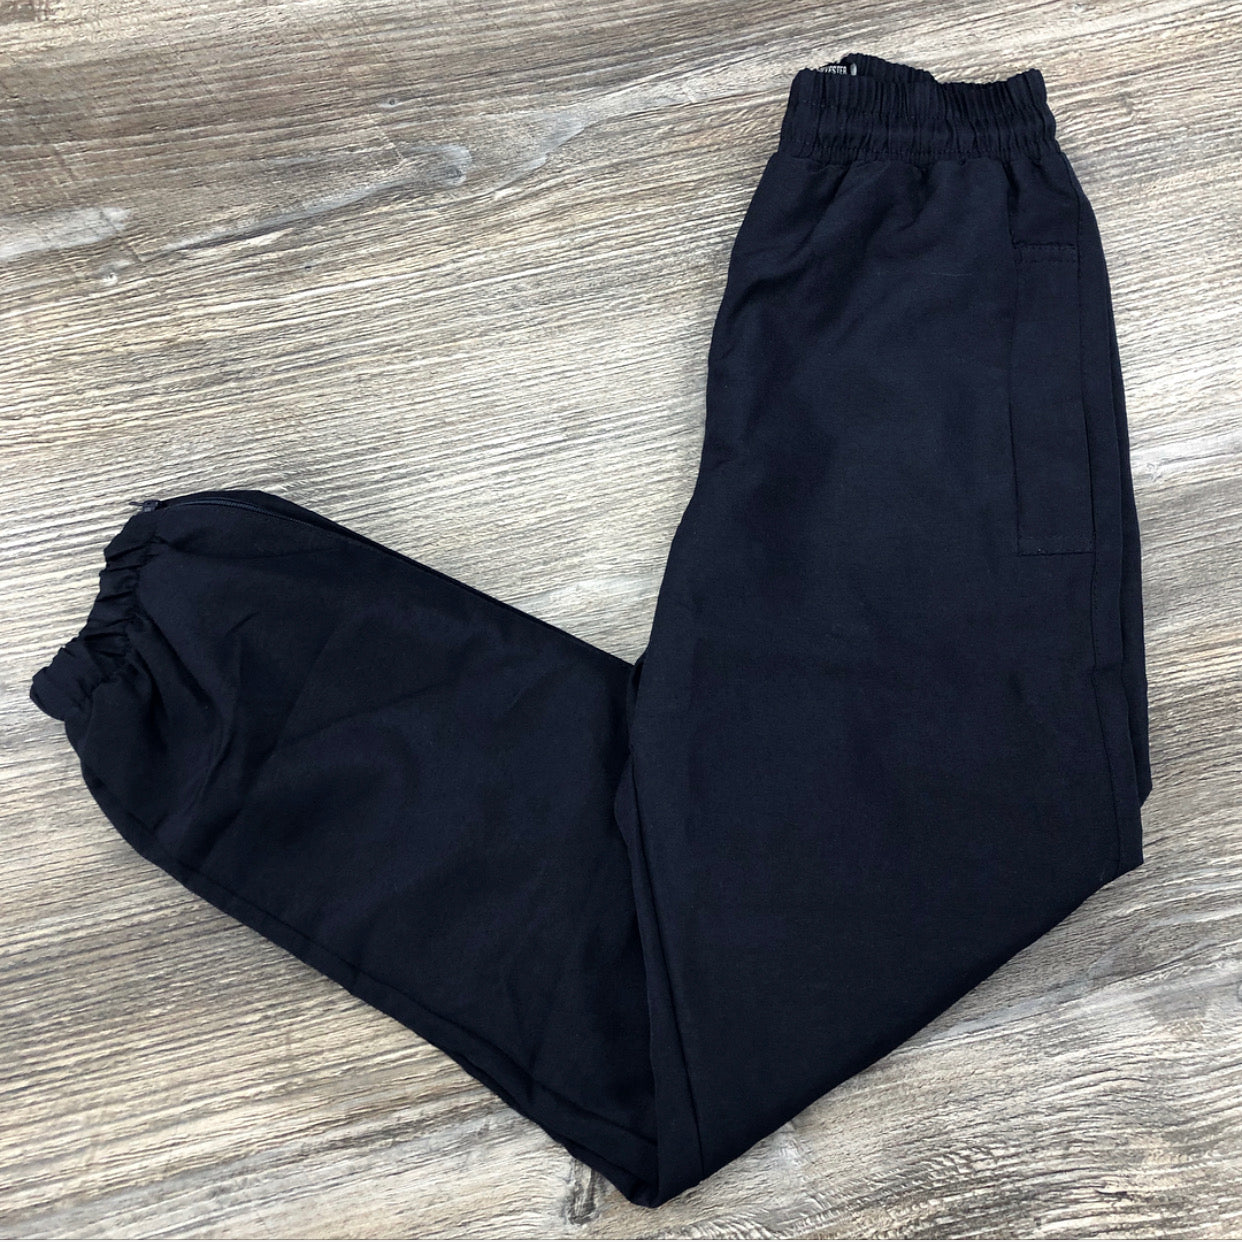 DISCONTINUED - QEGS Tracksuit Bottoms